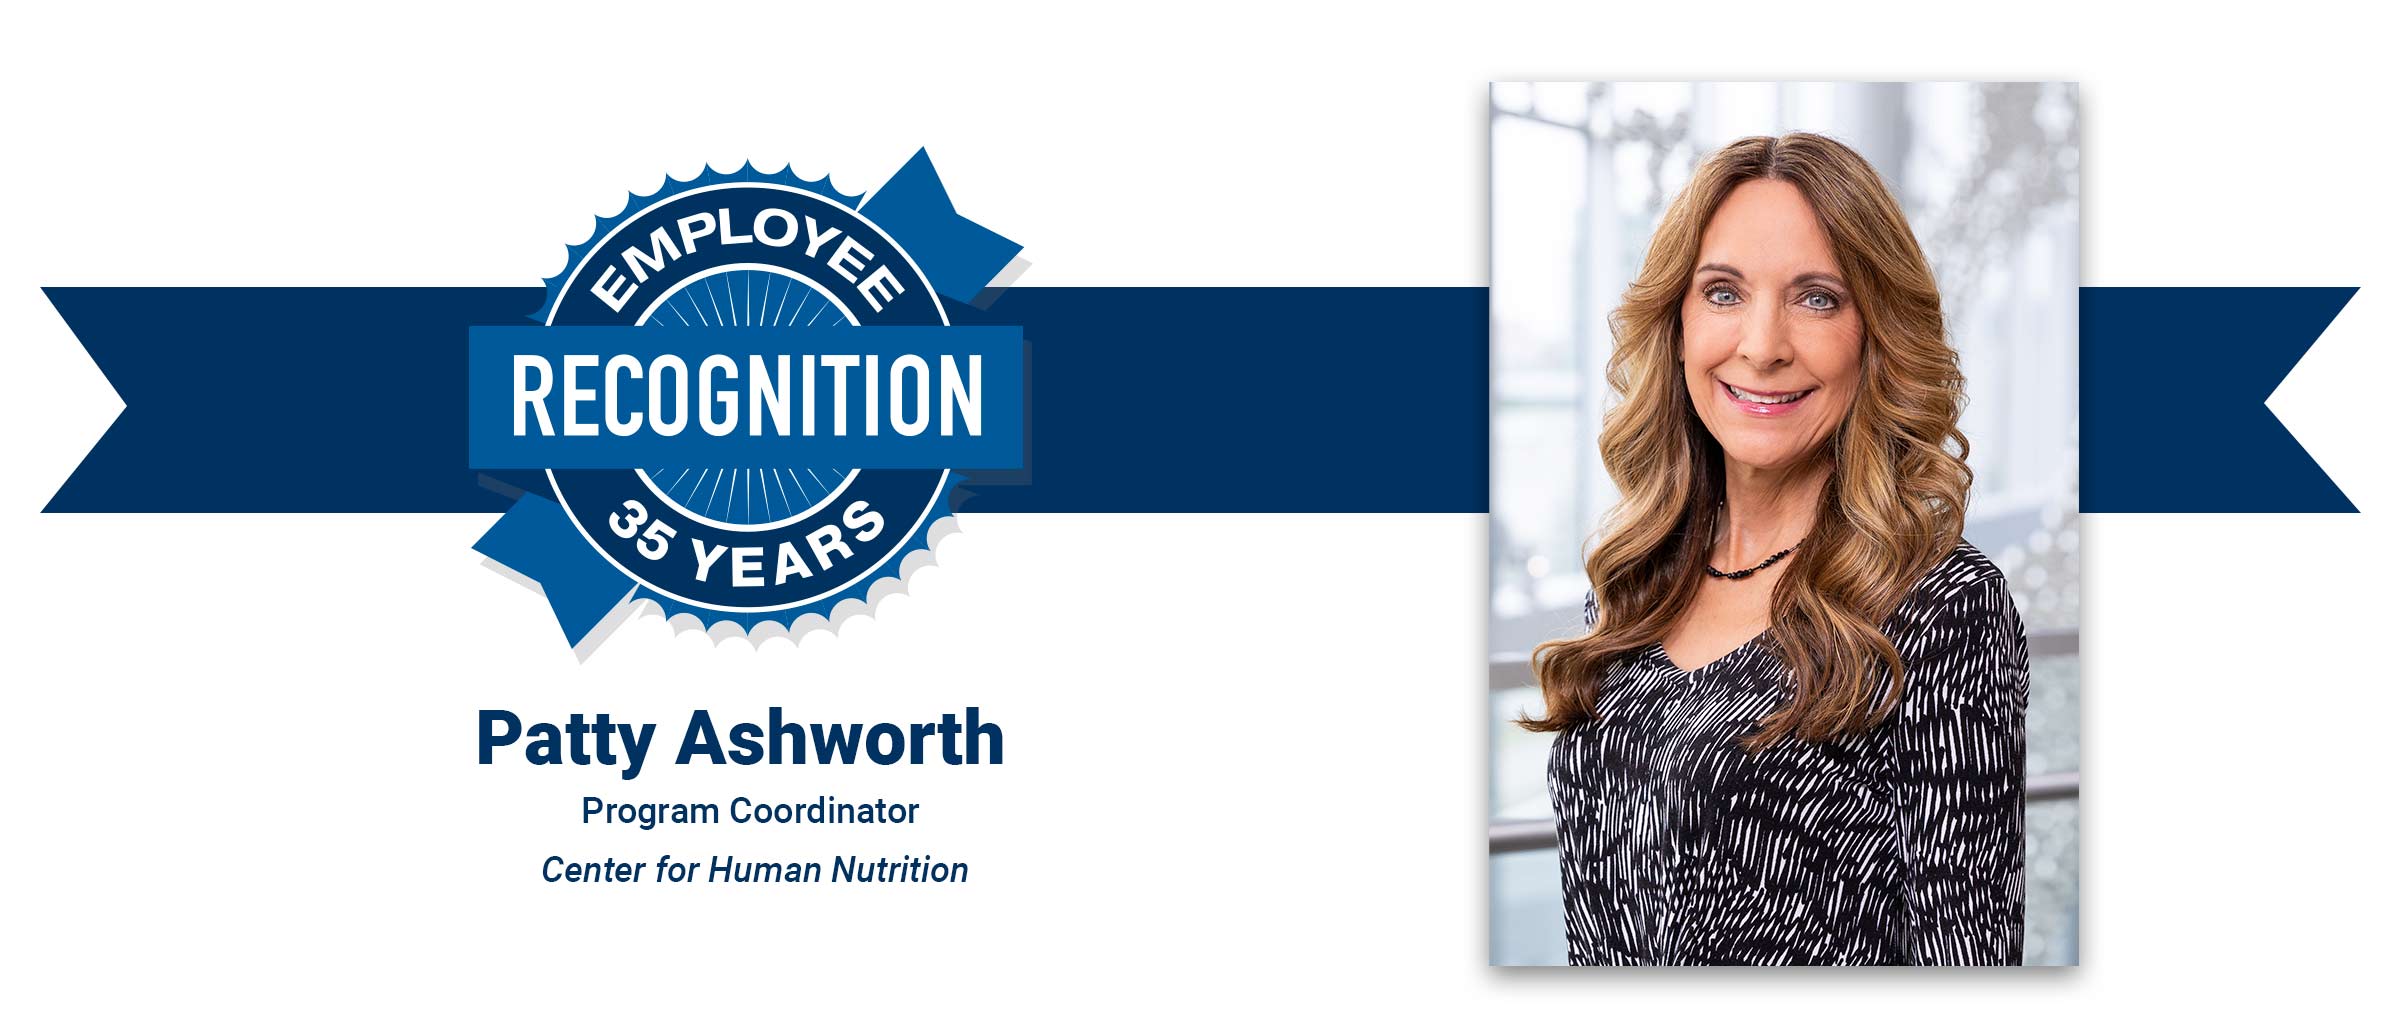 Woman with long brown hair, wearing black and white patterned shirt. Patty Ashworth, 35 years employee recognition.